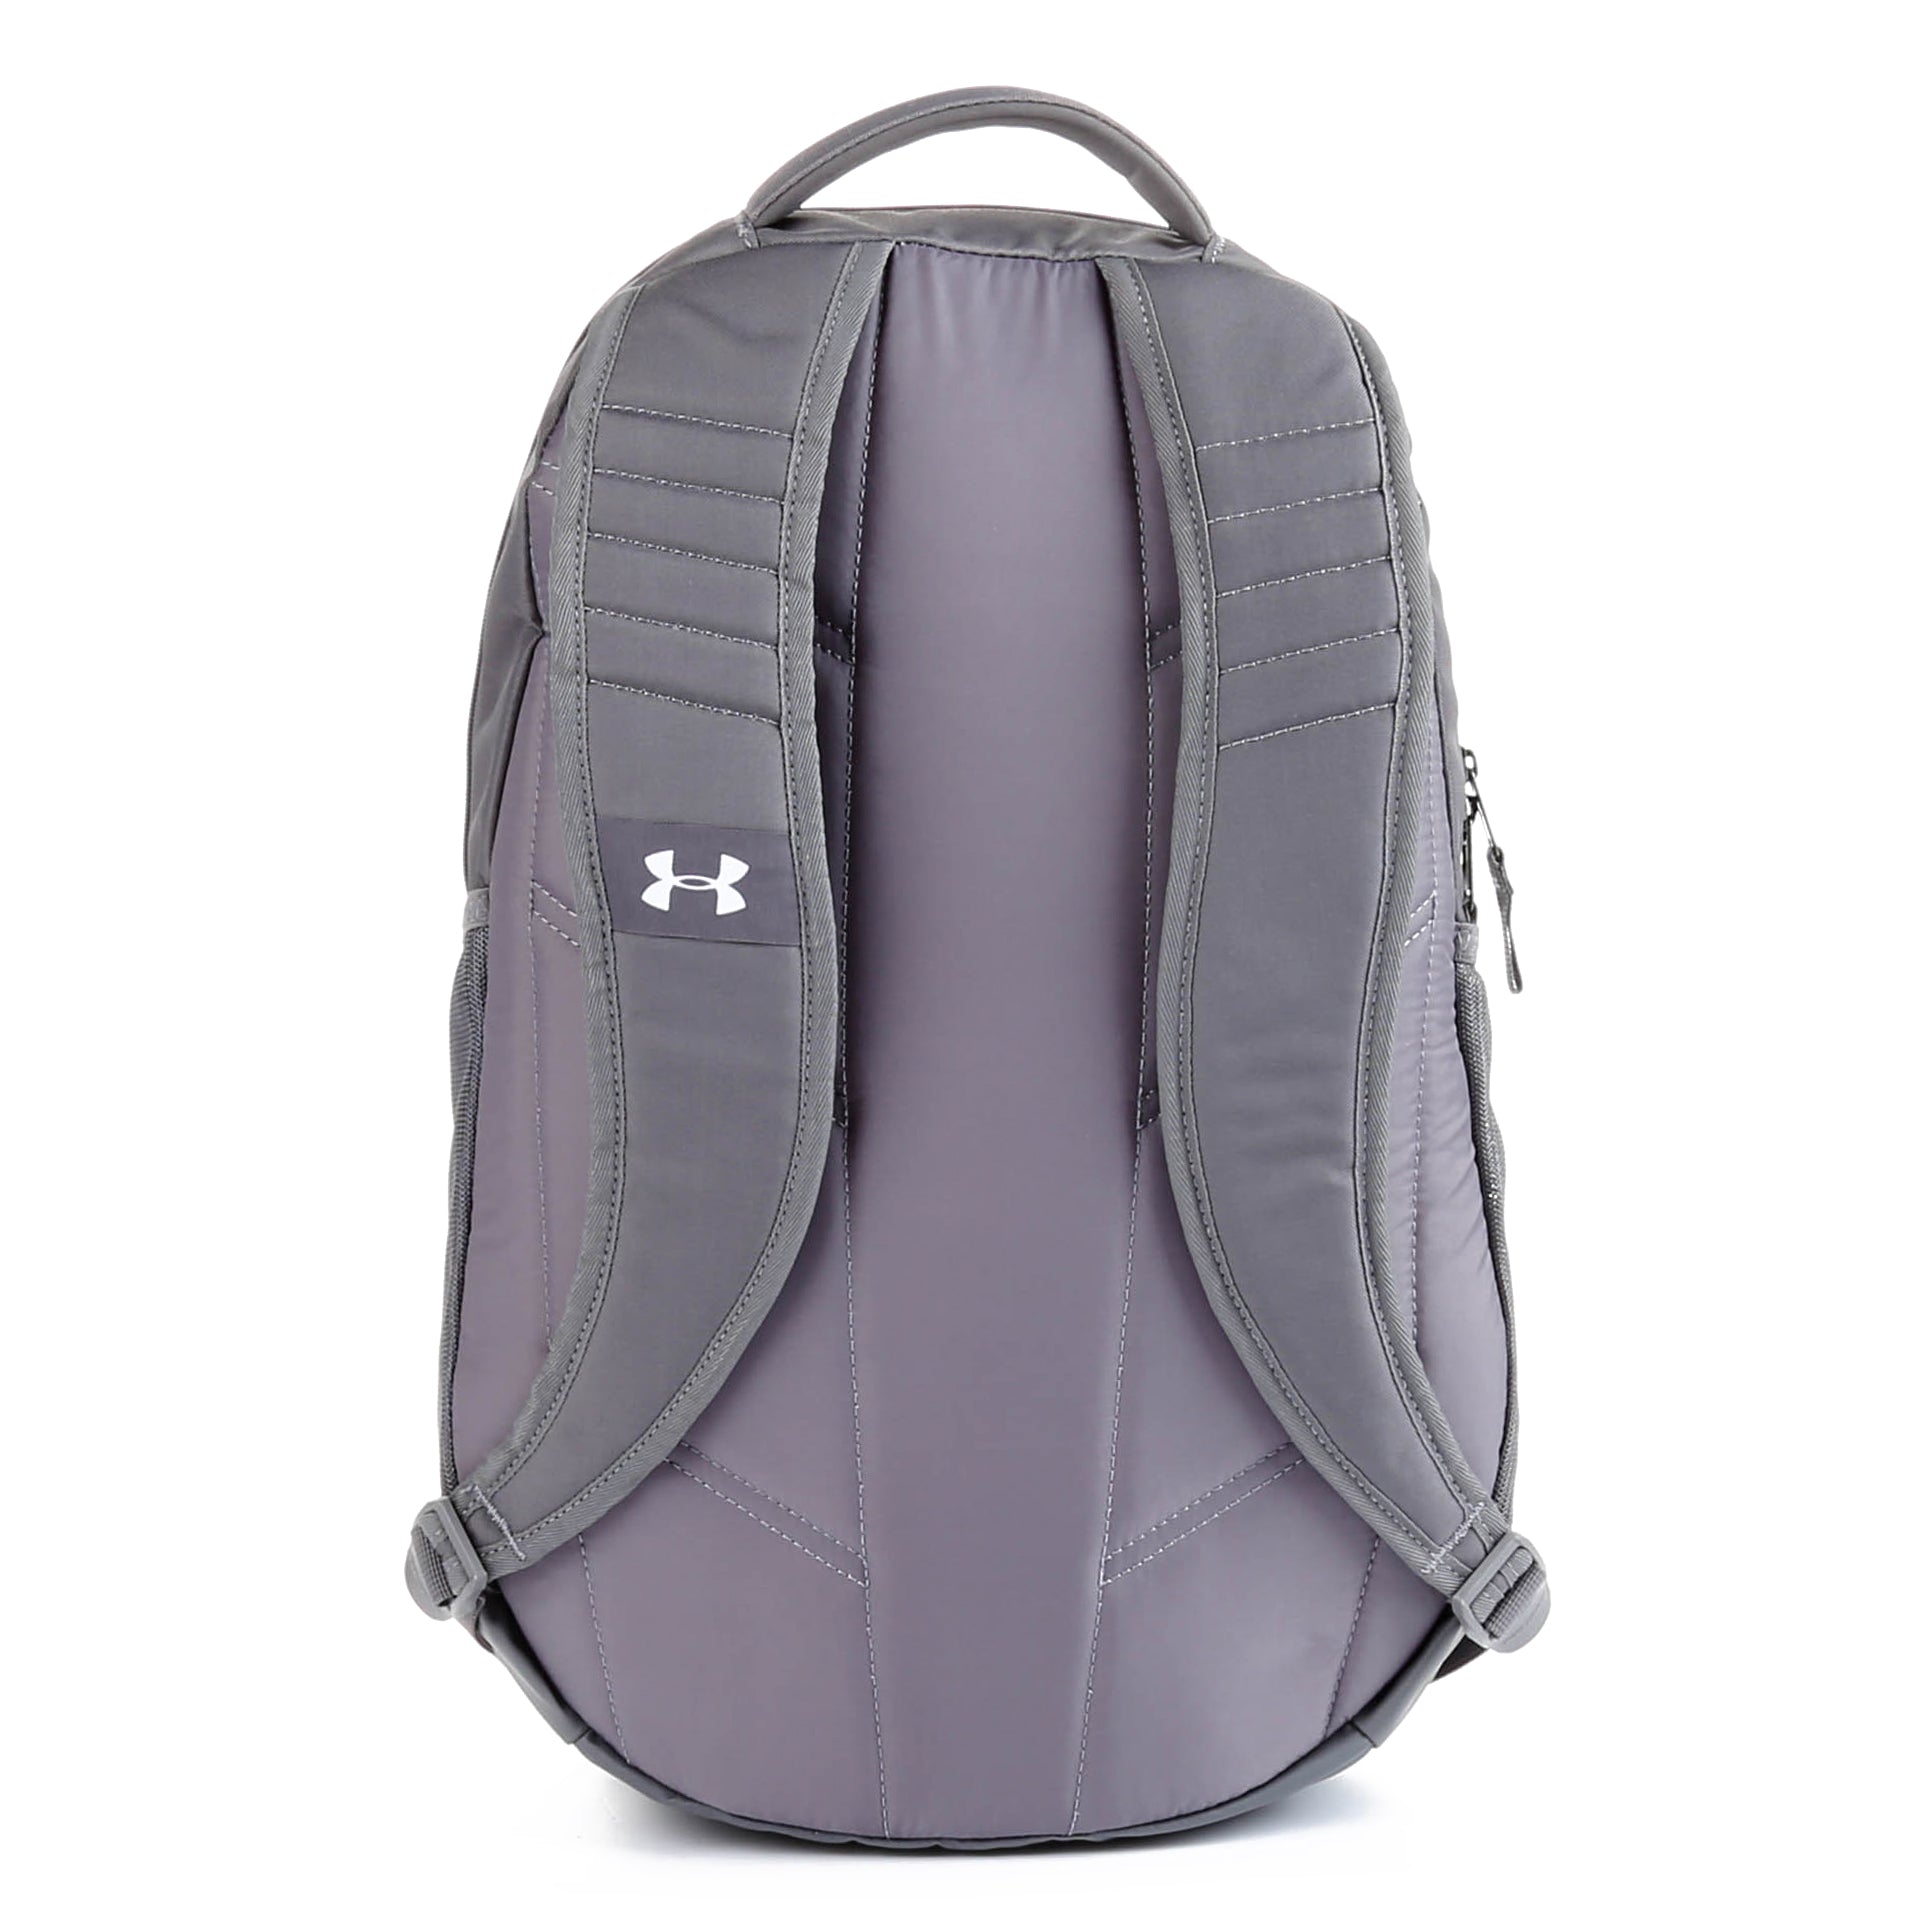 Under Armour Backpack Heavy Markdown on Amazon for 21% off